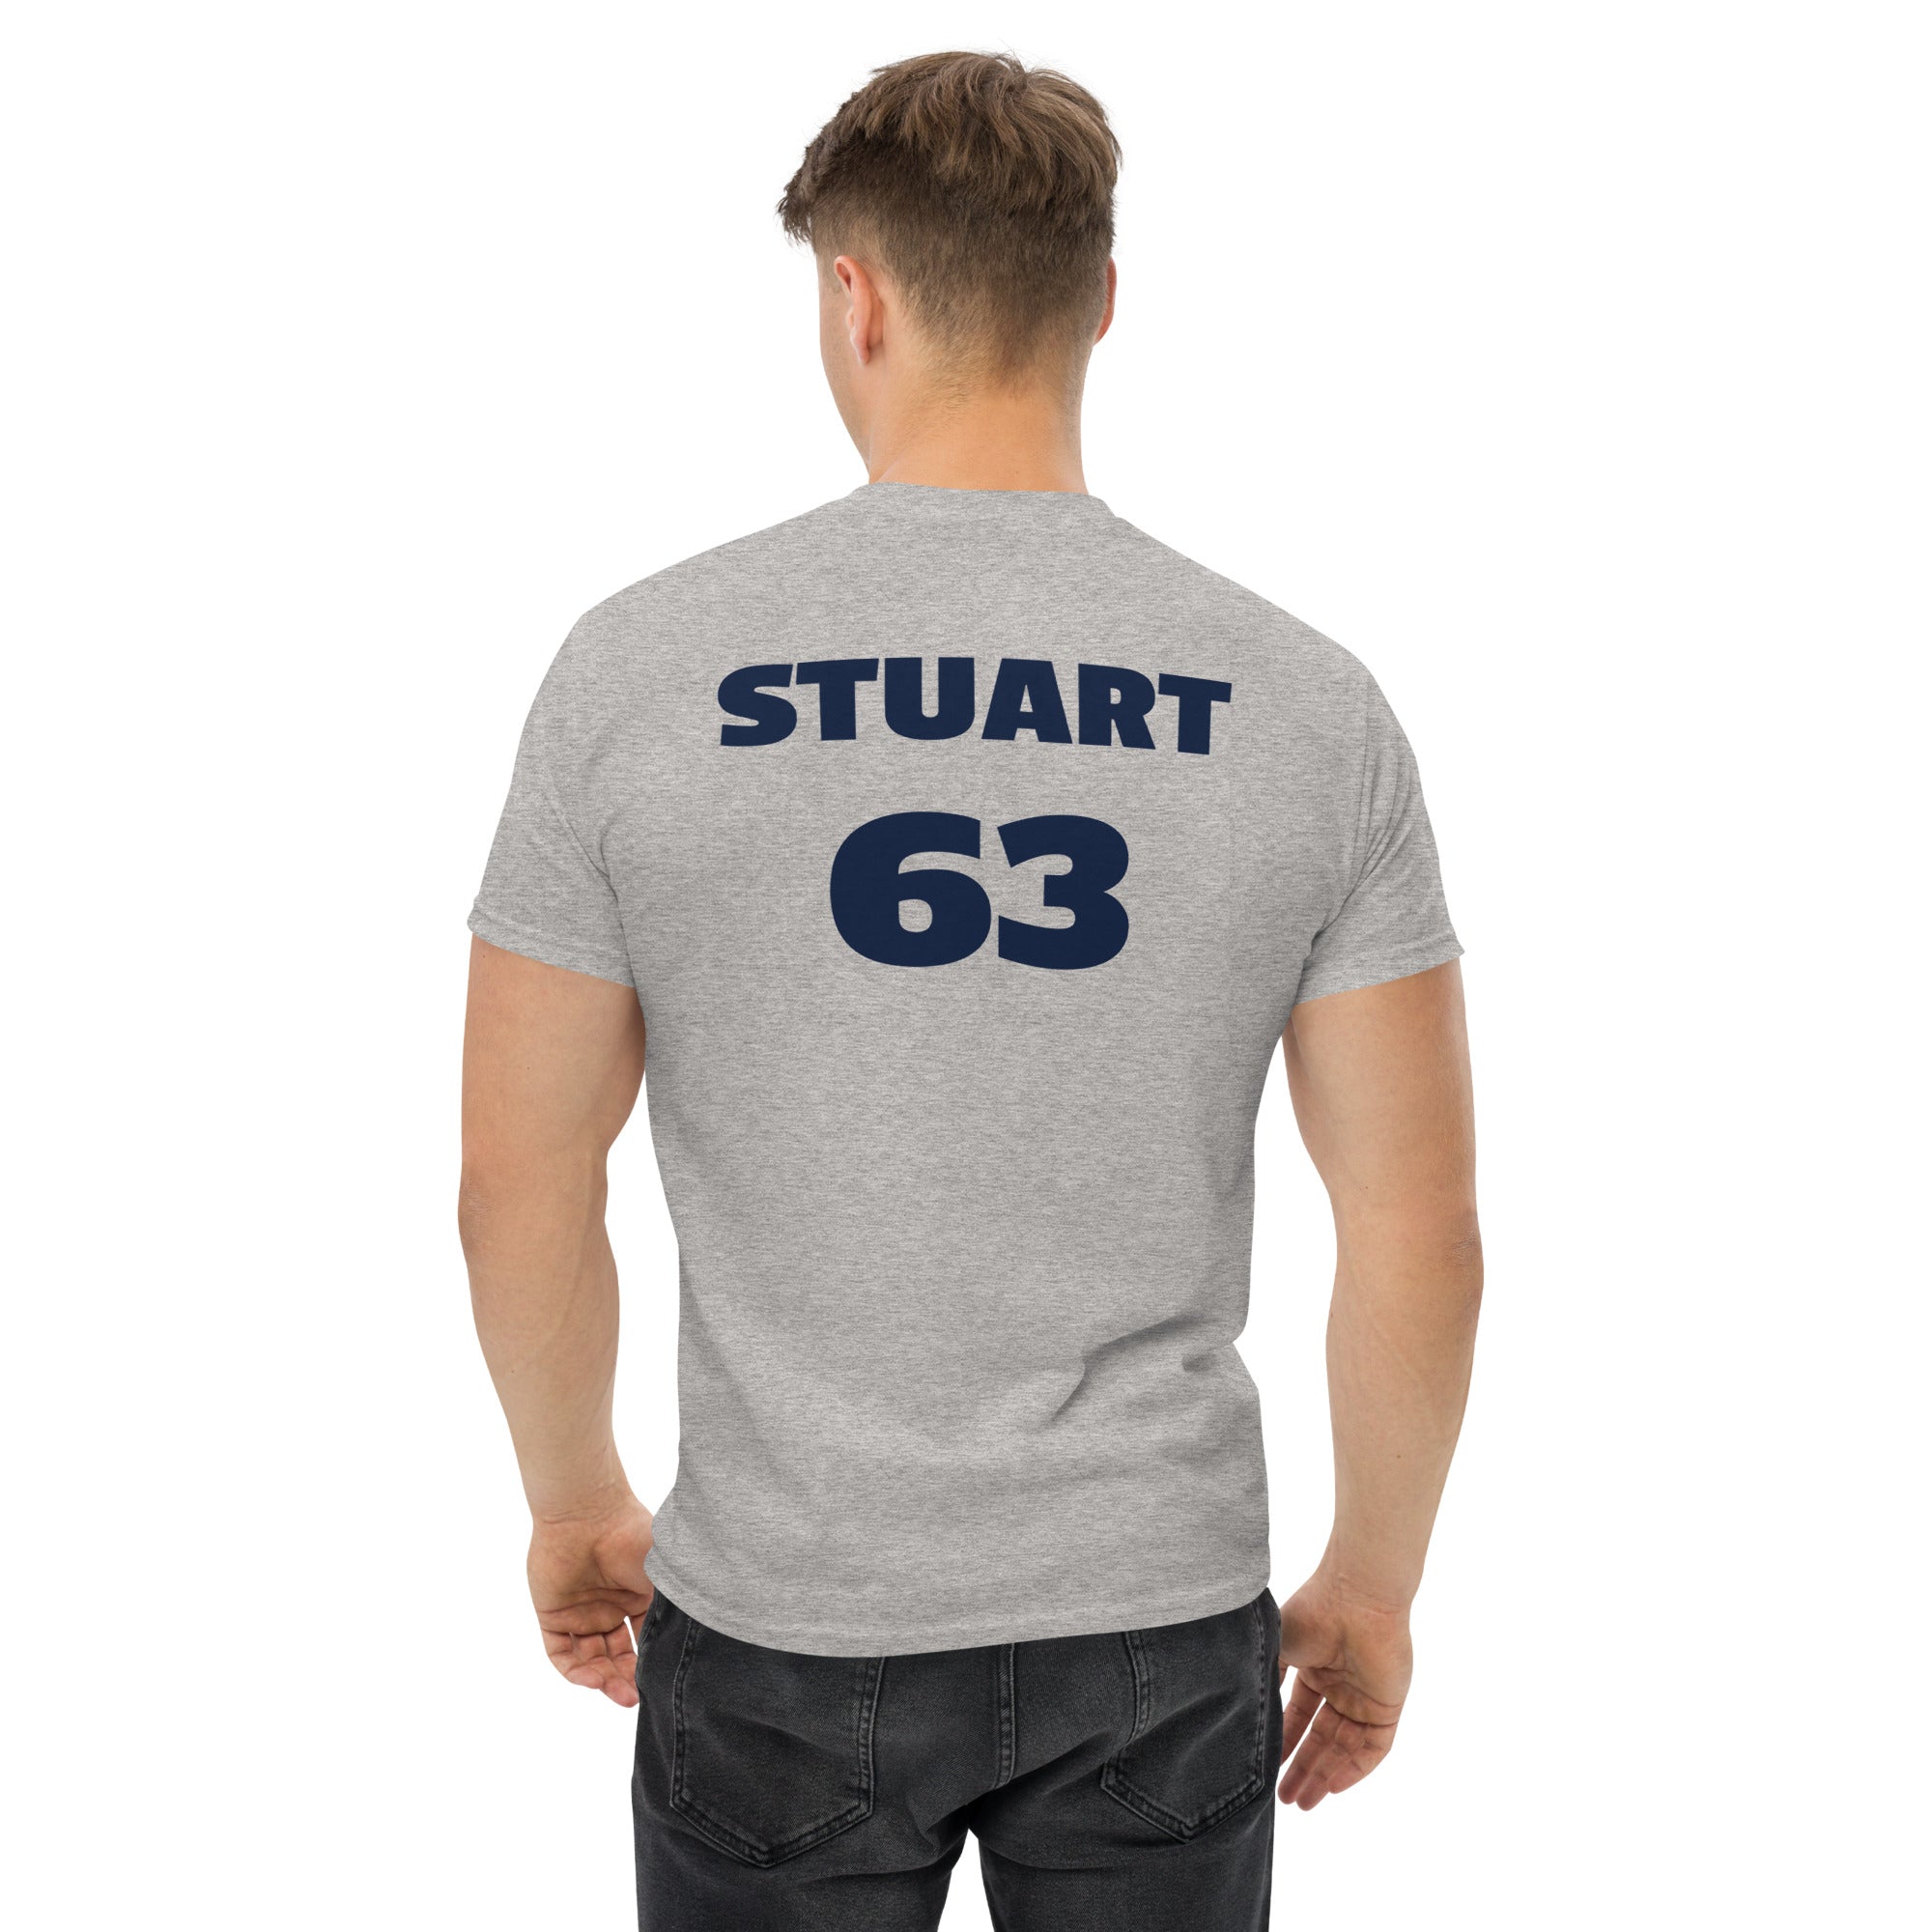 Stuart #63 - The Battle of Gettysburg Podcast Jersey Collection